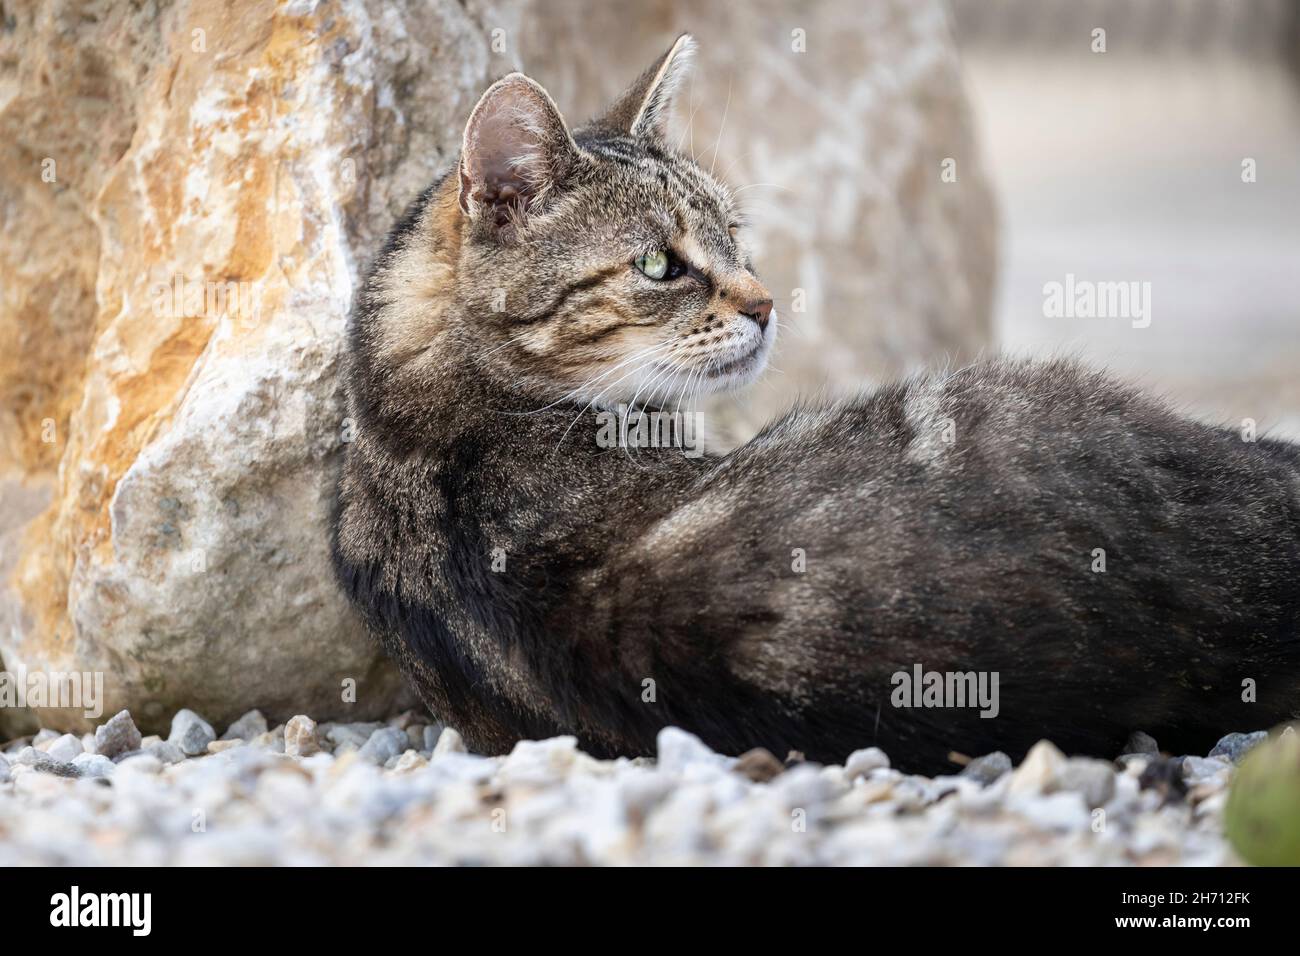 Domestic cat. An adult tabby cat lies on gravel next to a rock. Germany Stock Photo